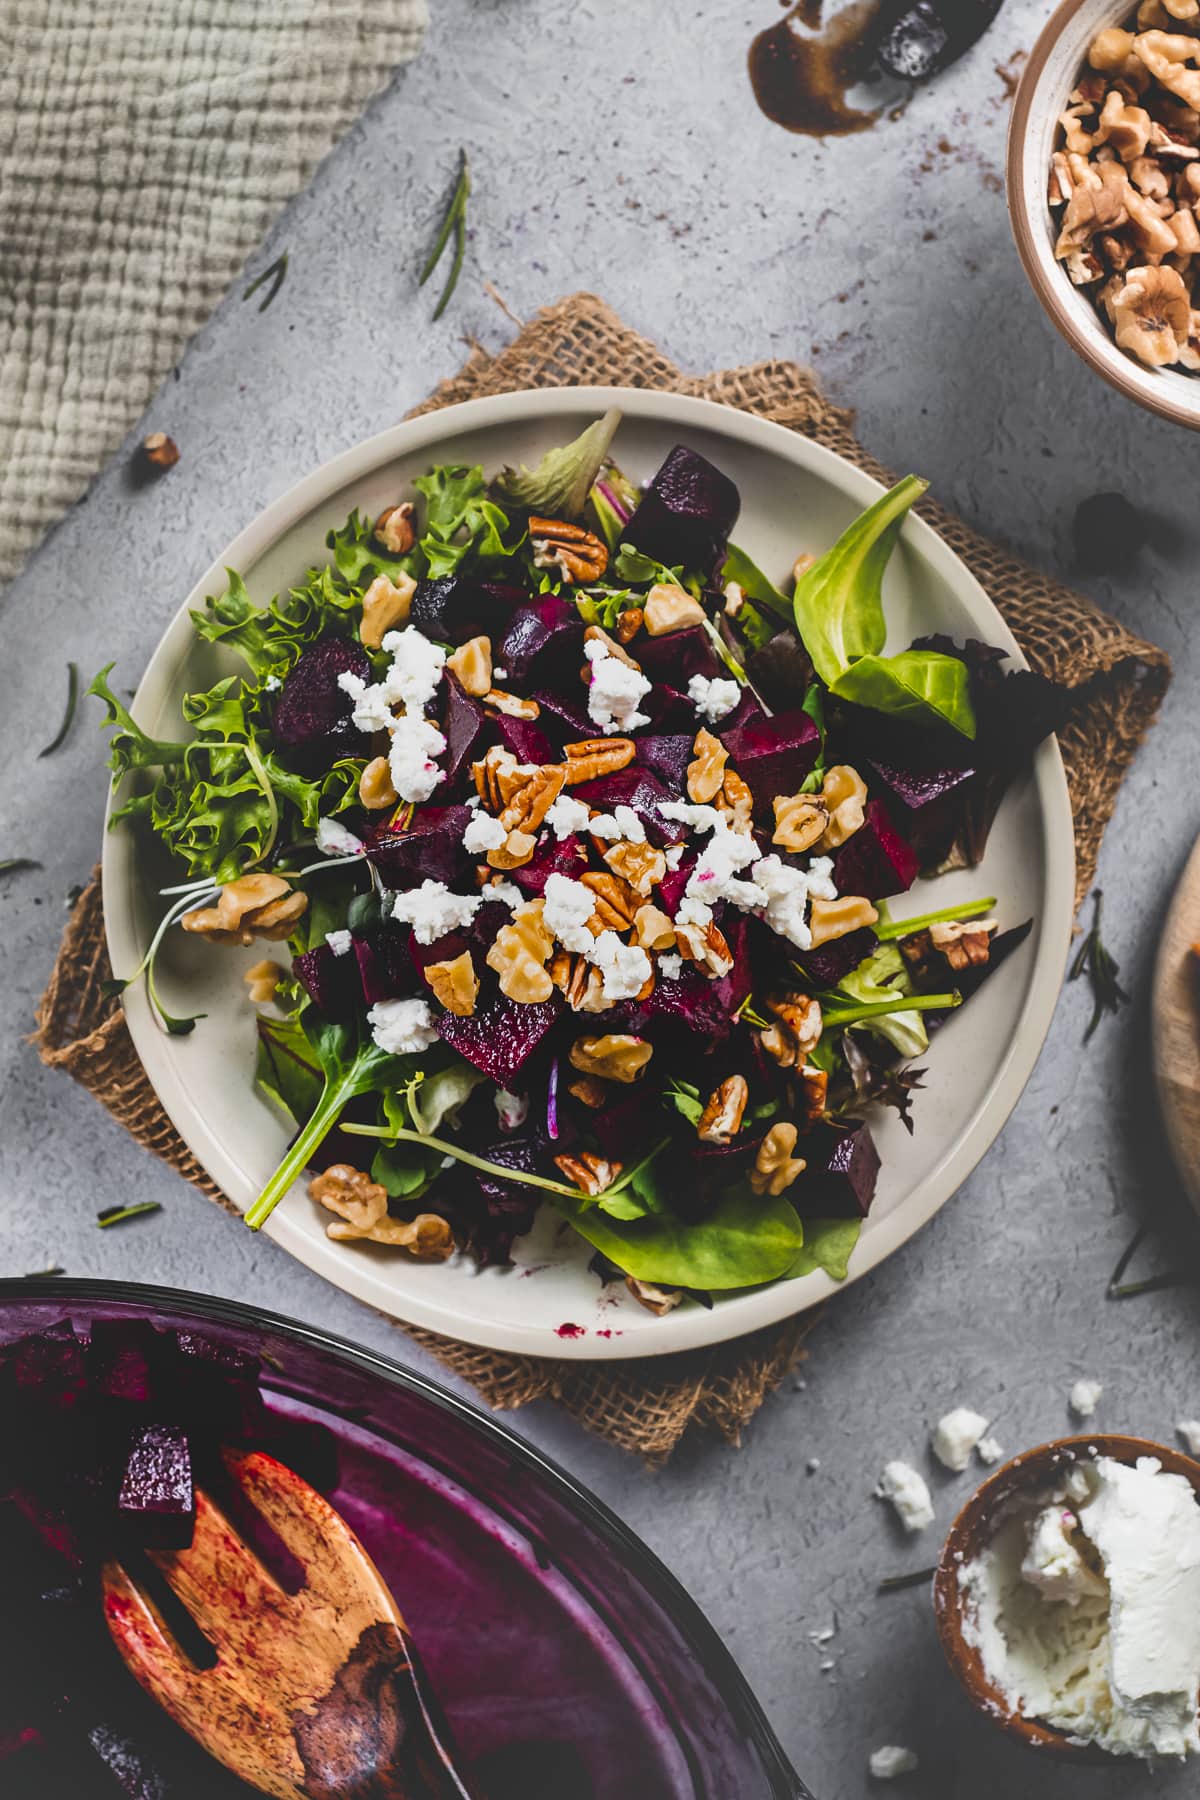 A plate of salad greens topped with roasted balsamic beets, soft goat cheese, walnuts and pecans.